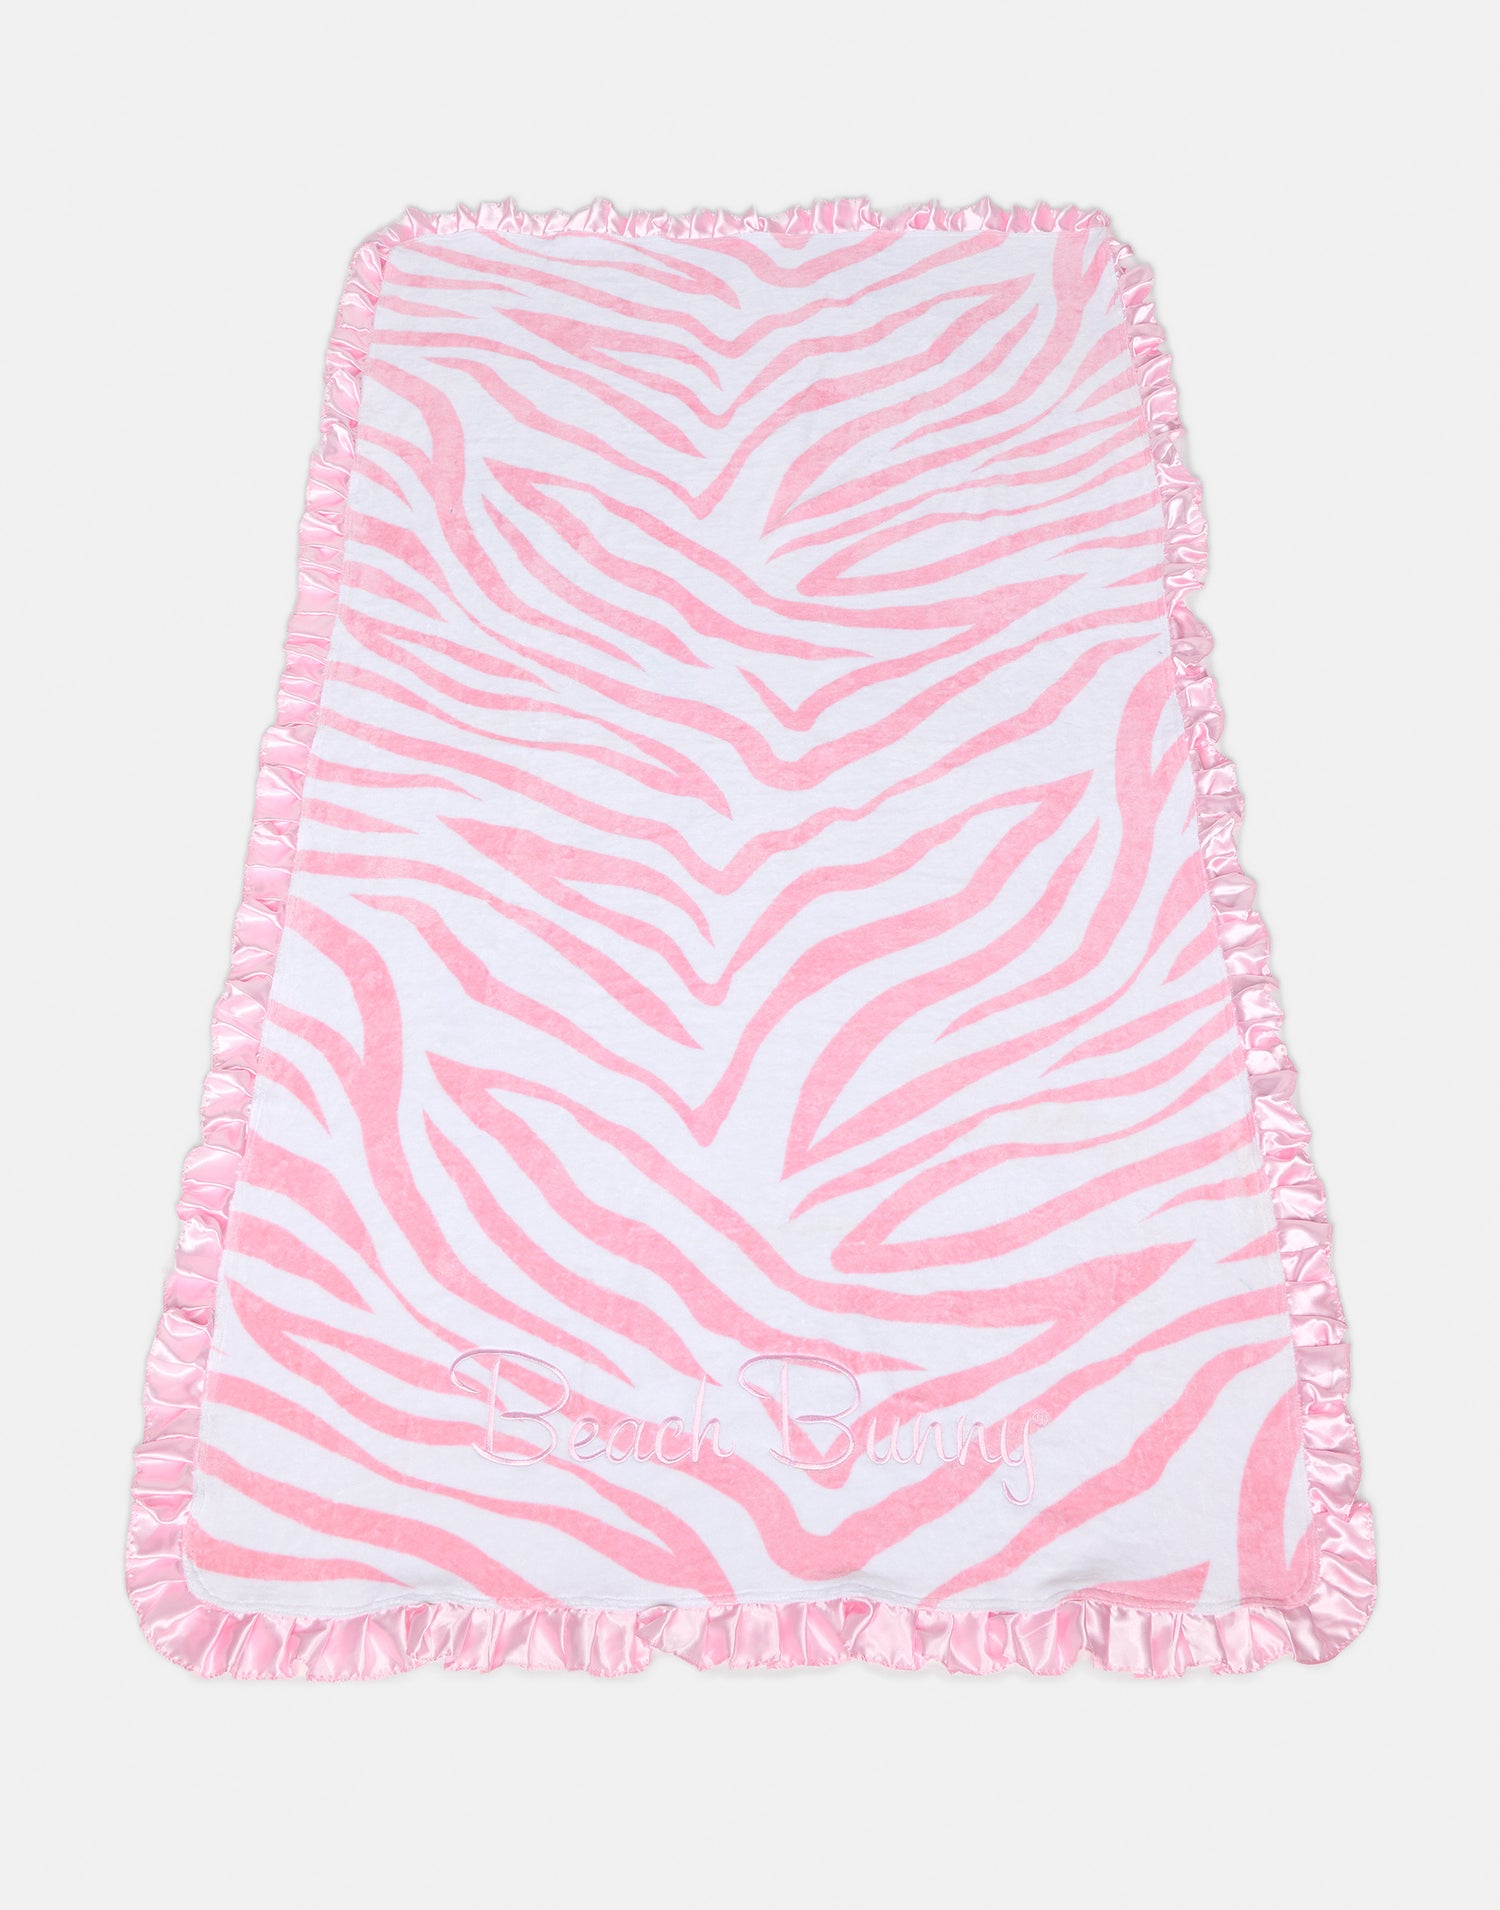 Beach Bunny Towel in Pink White Tiger with Pink Ruffle - Product View